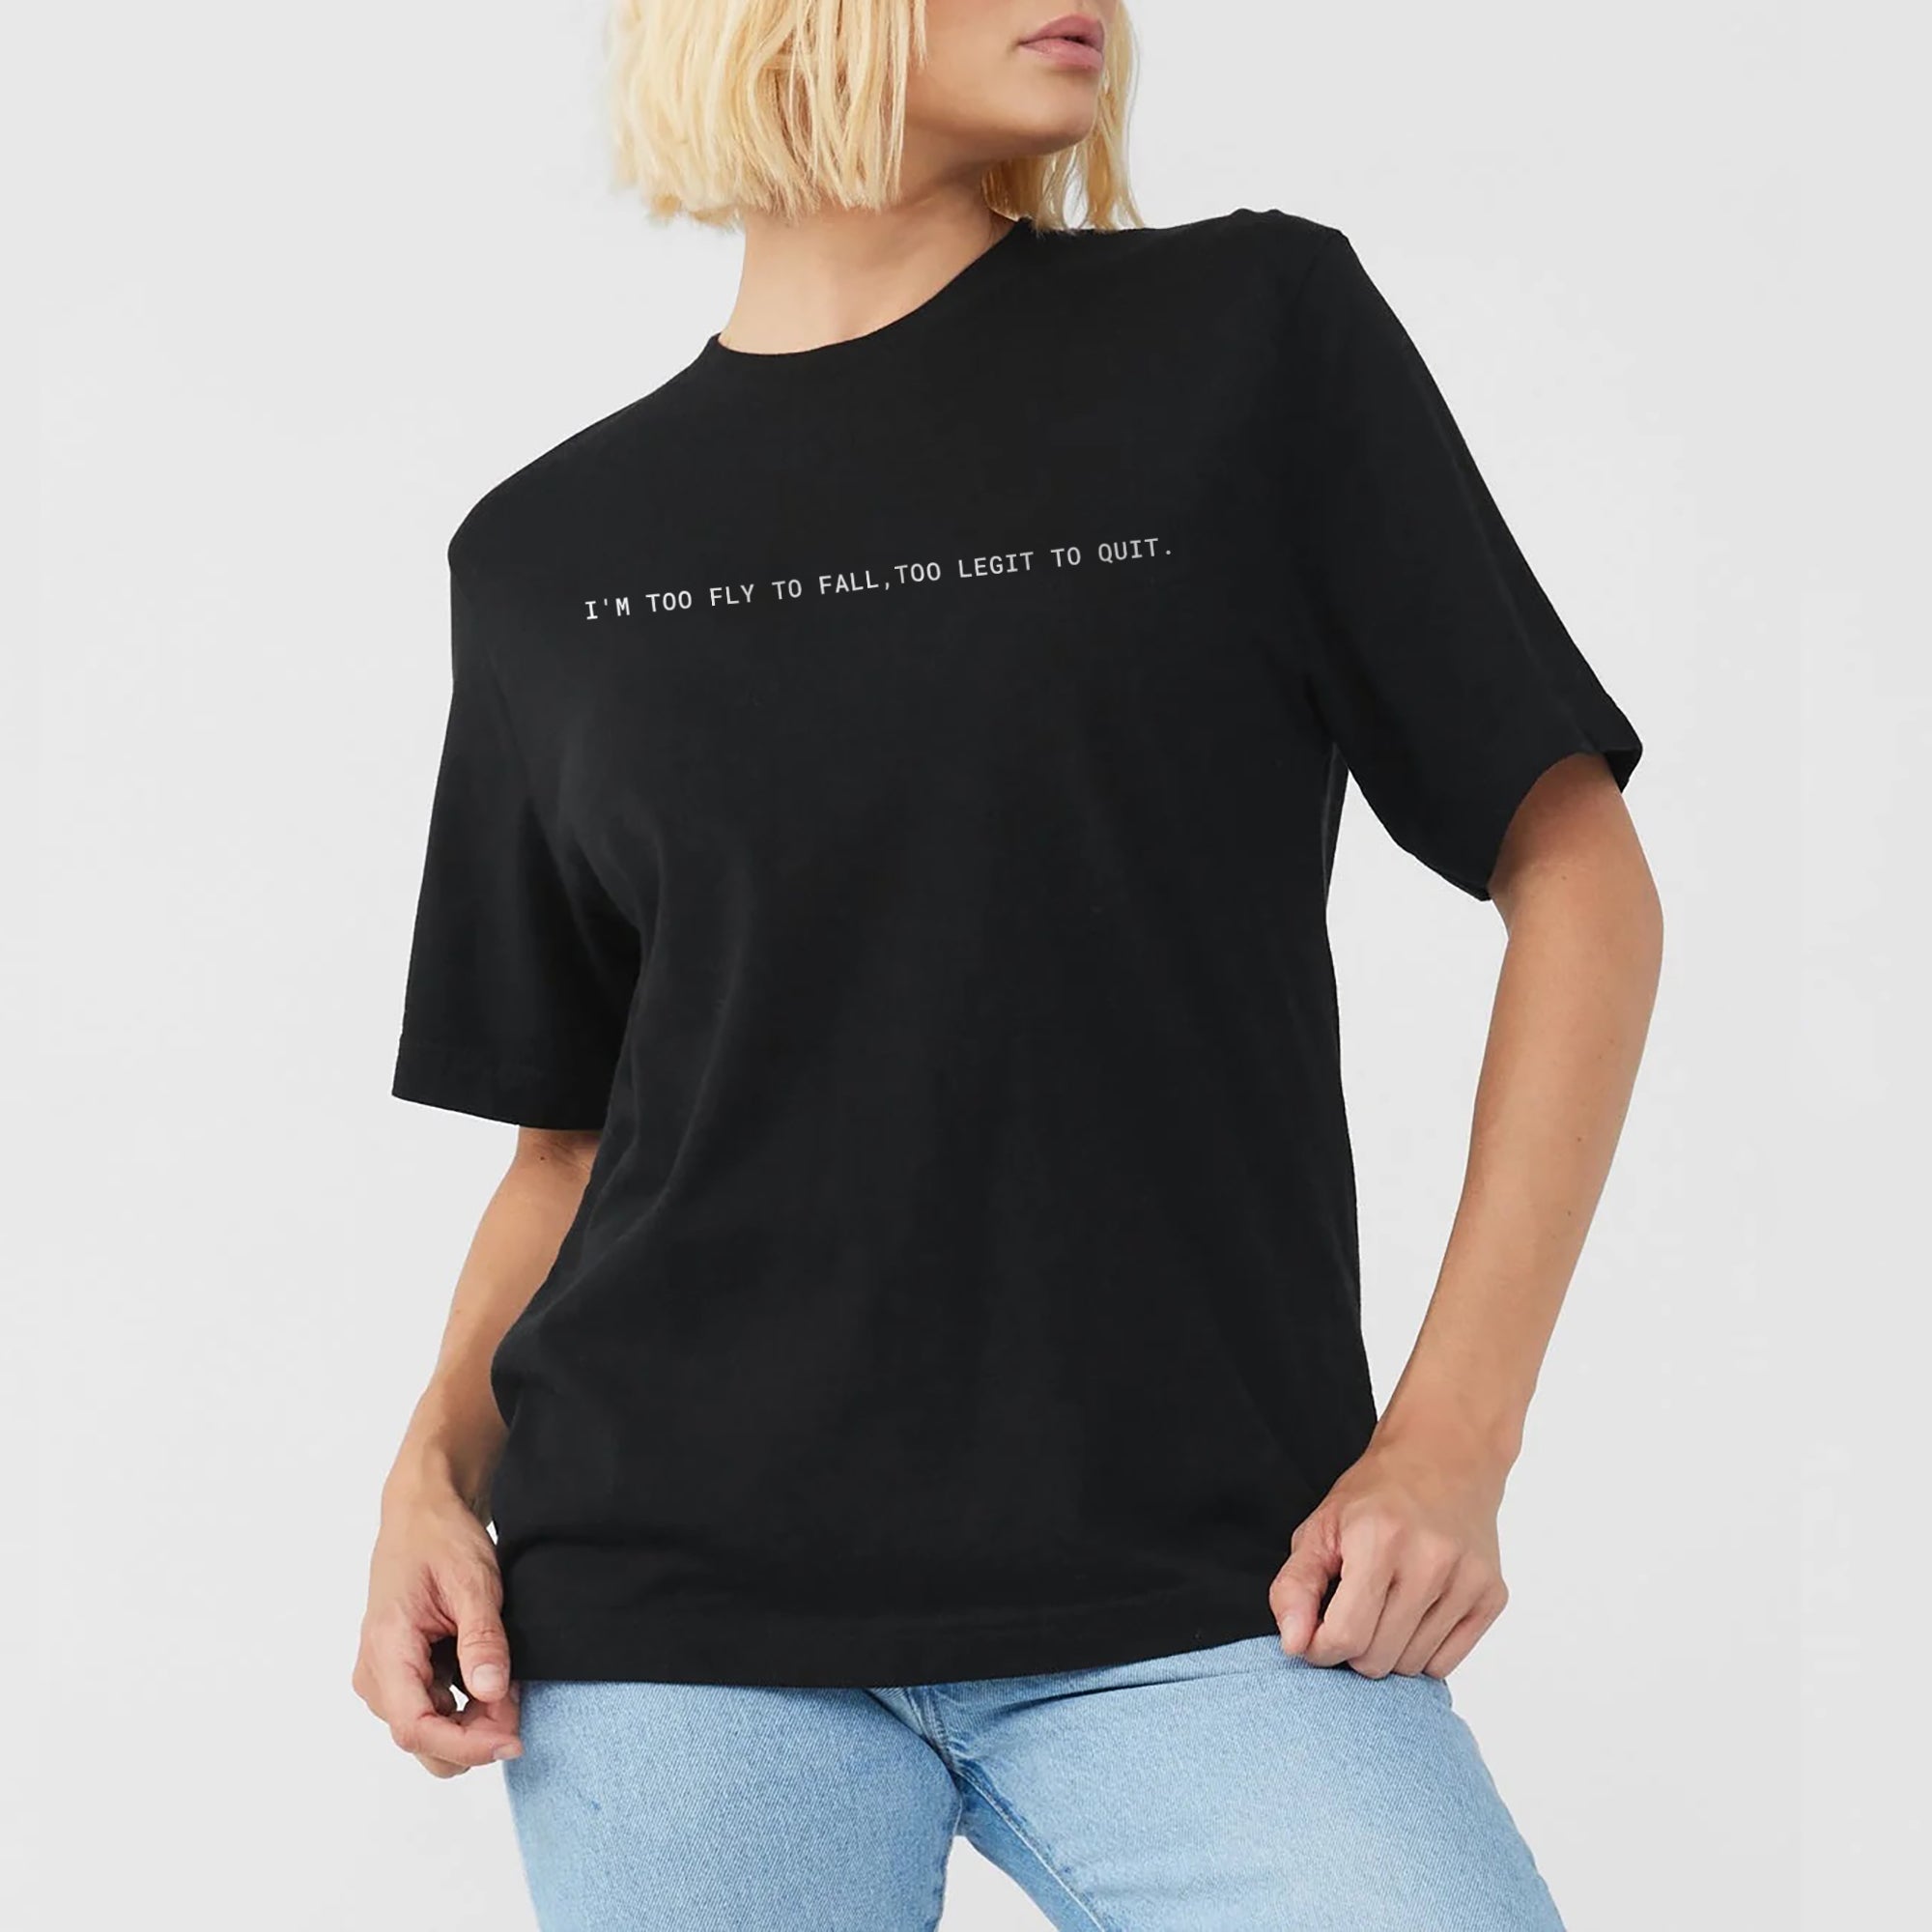 I'm too fly to fall,too legit to quit Boyfriend Crew Tee Solid Black Model Image